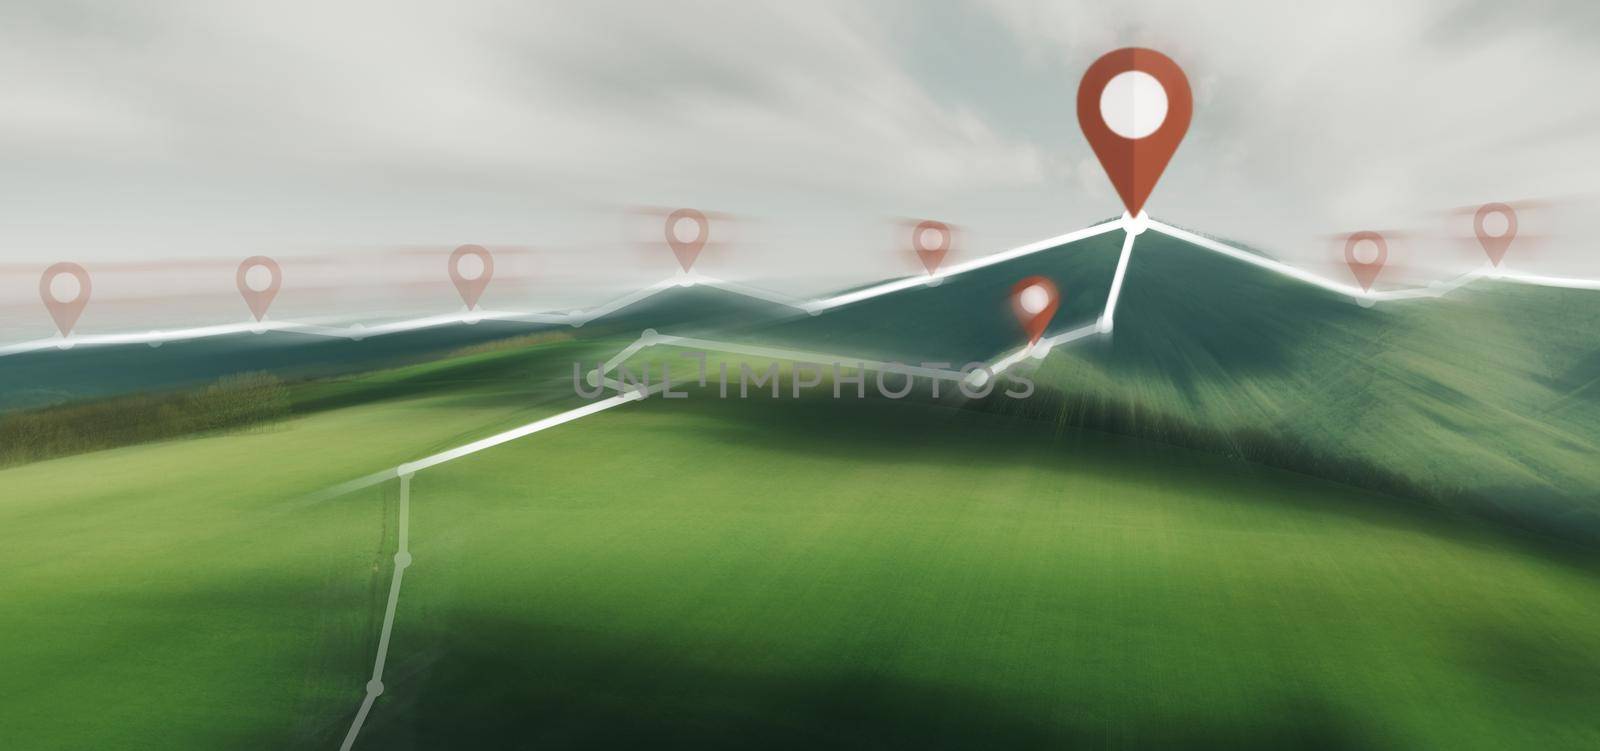 Mountain summer landscape with abstract connected location pins and track. Navigation concept. Image with moving fast and motion blur effect.